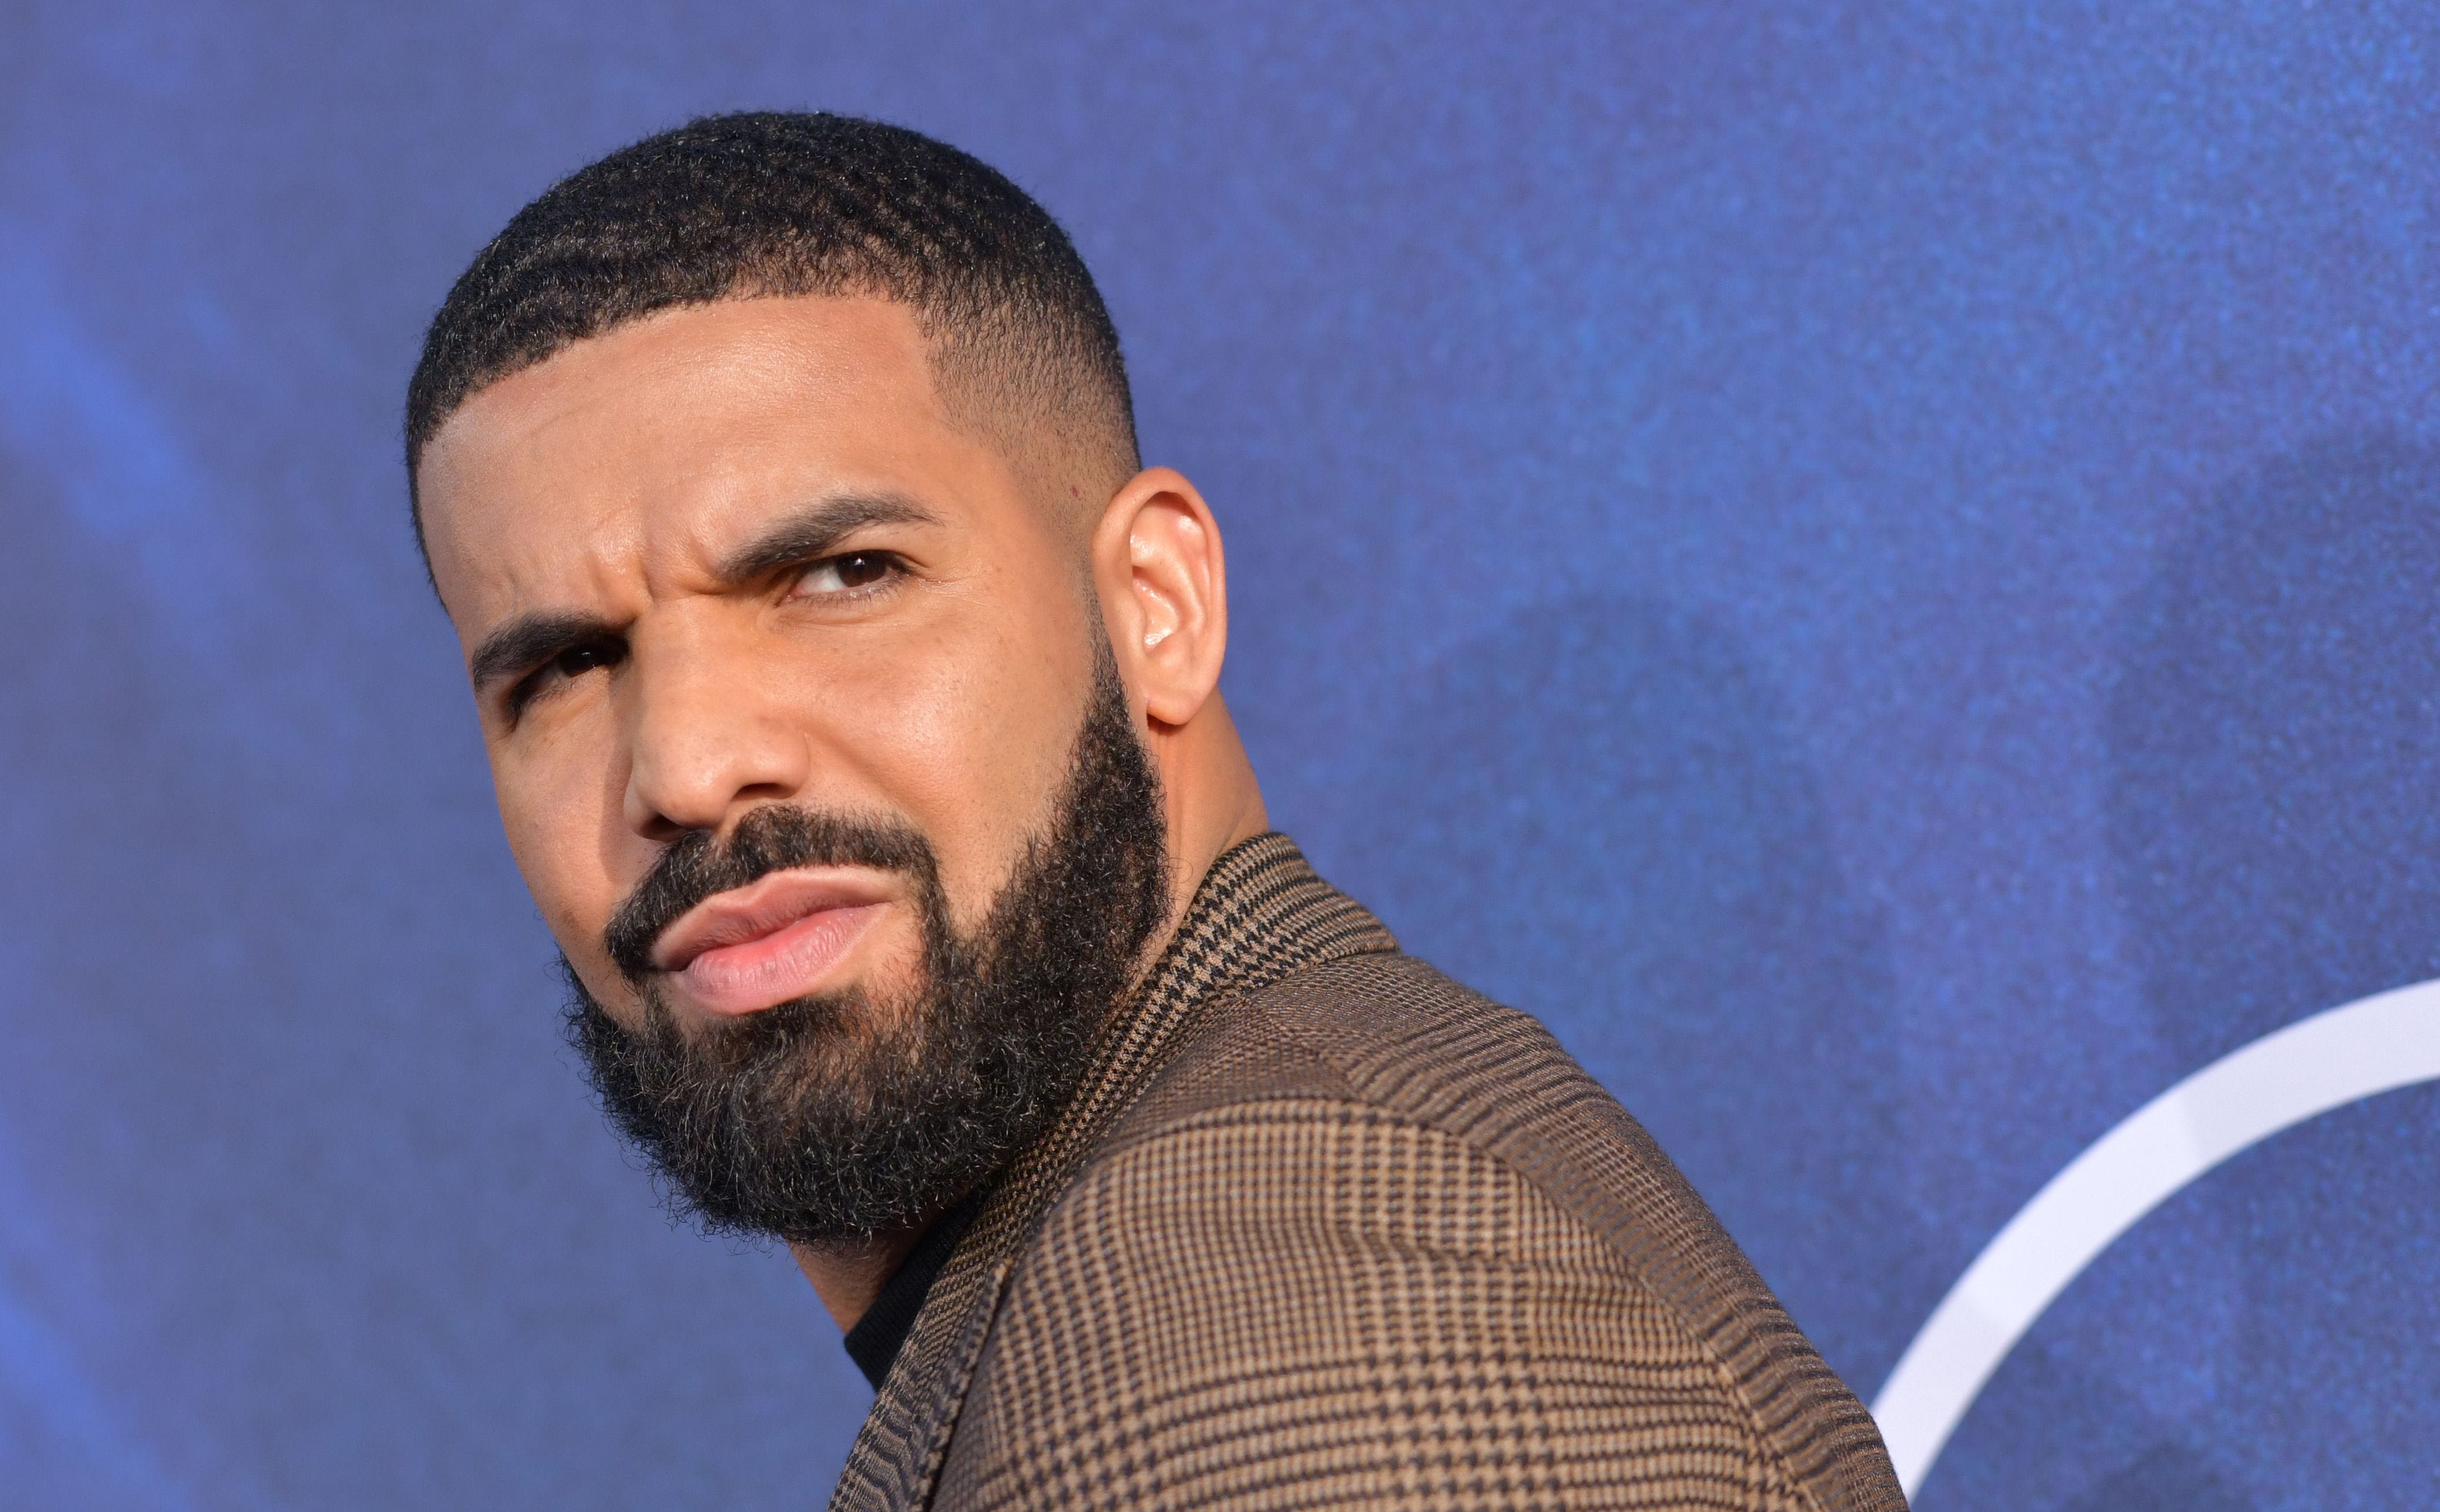 Drake says he'd be arrested if he committed sexual assault. Statistically that's not true.